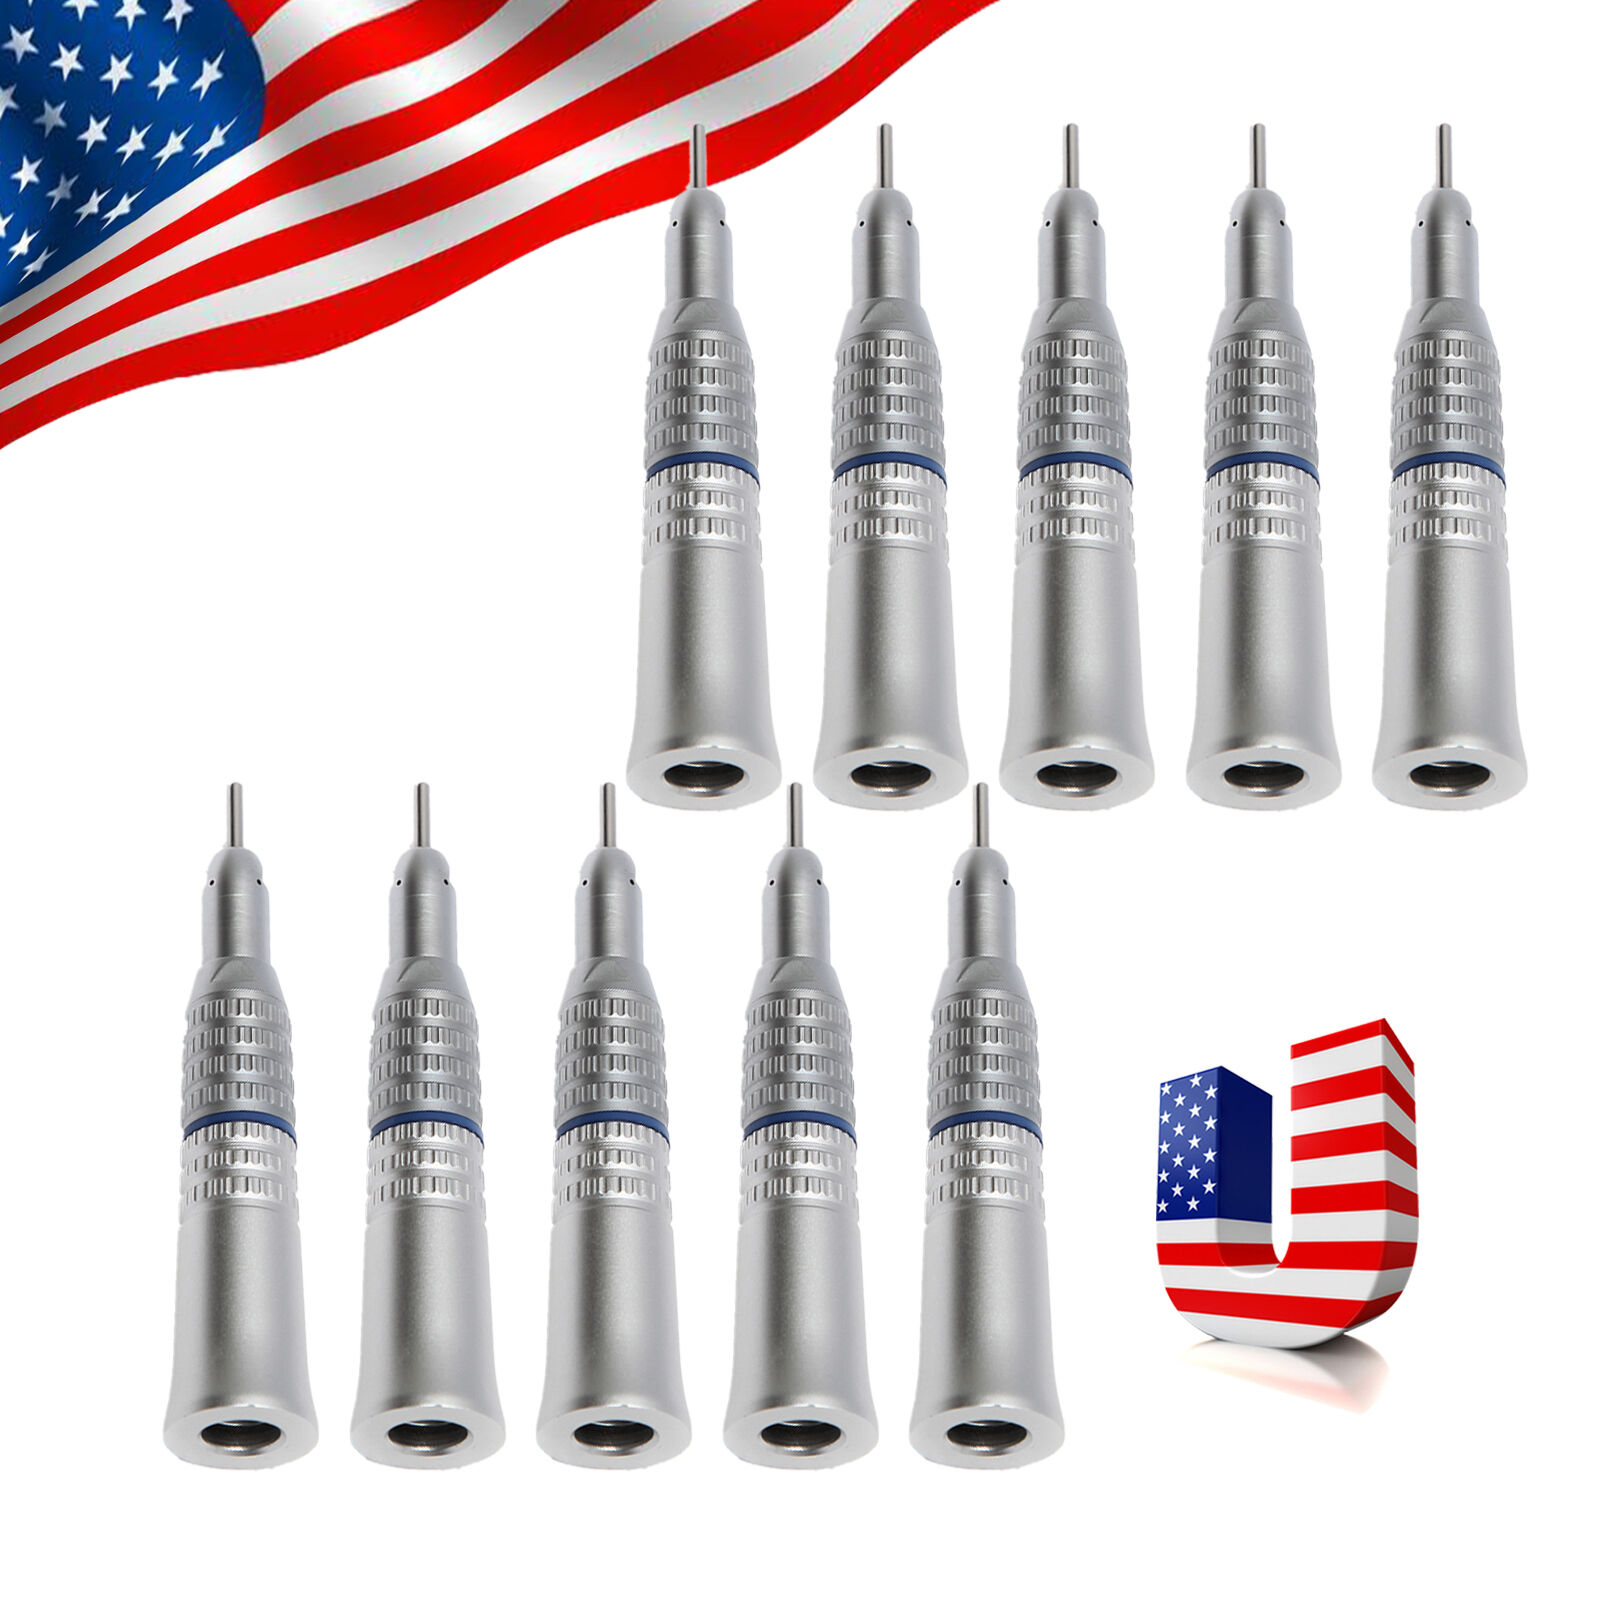 US STOCK 10pc NSK Dental E-Type Straight Nosecone Slow Low Speed Handpiece YP